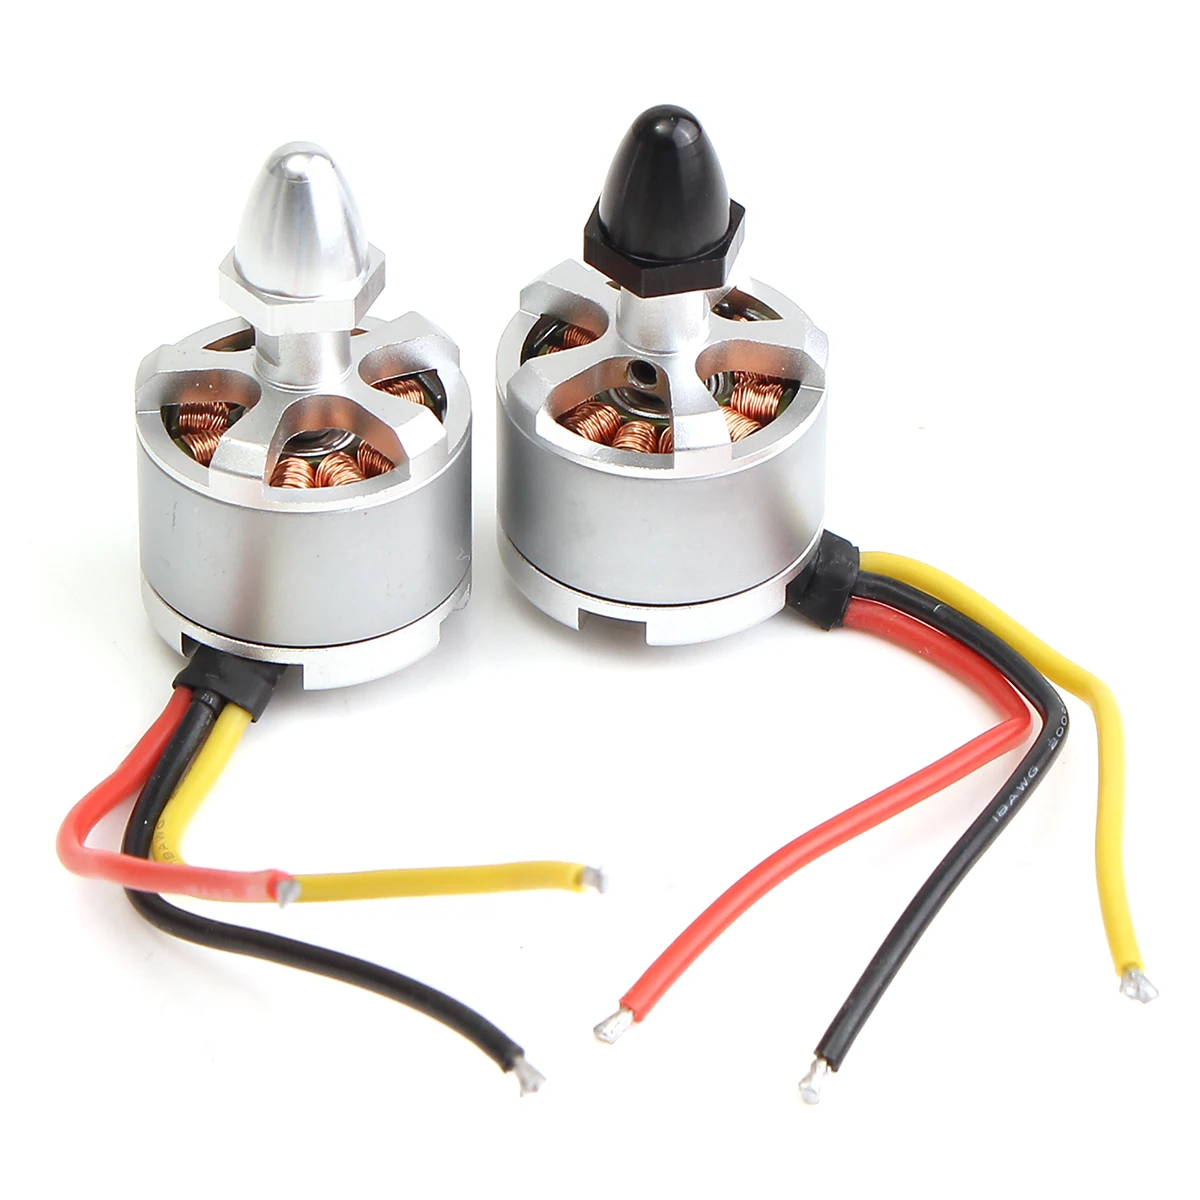 

CW/CCW Brushless Motor 2212 920KV for 3-4S RC Quadcopter for DJI Phantom F330 F450 F550 X525 Cheerson CX-20 Drone CW/CCW Motor